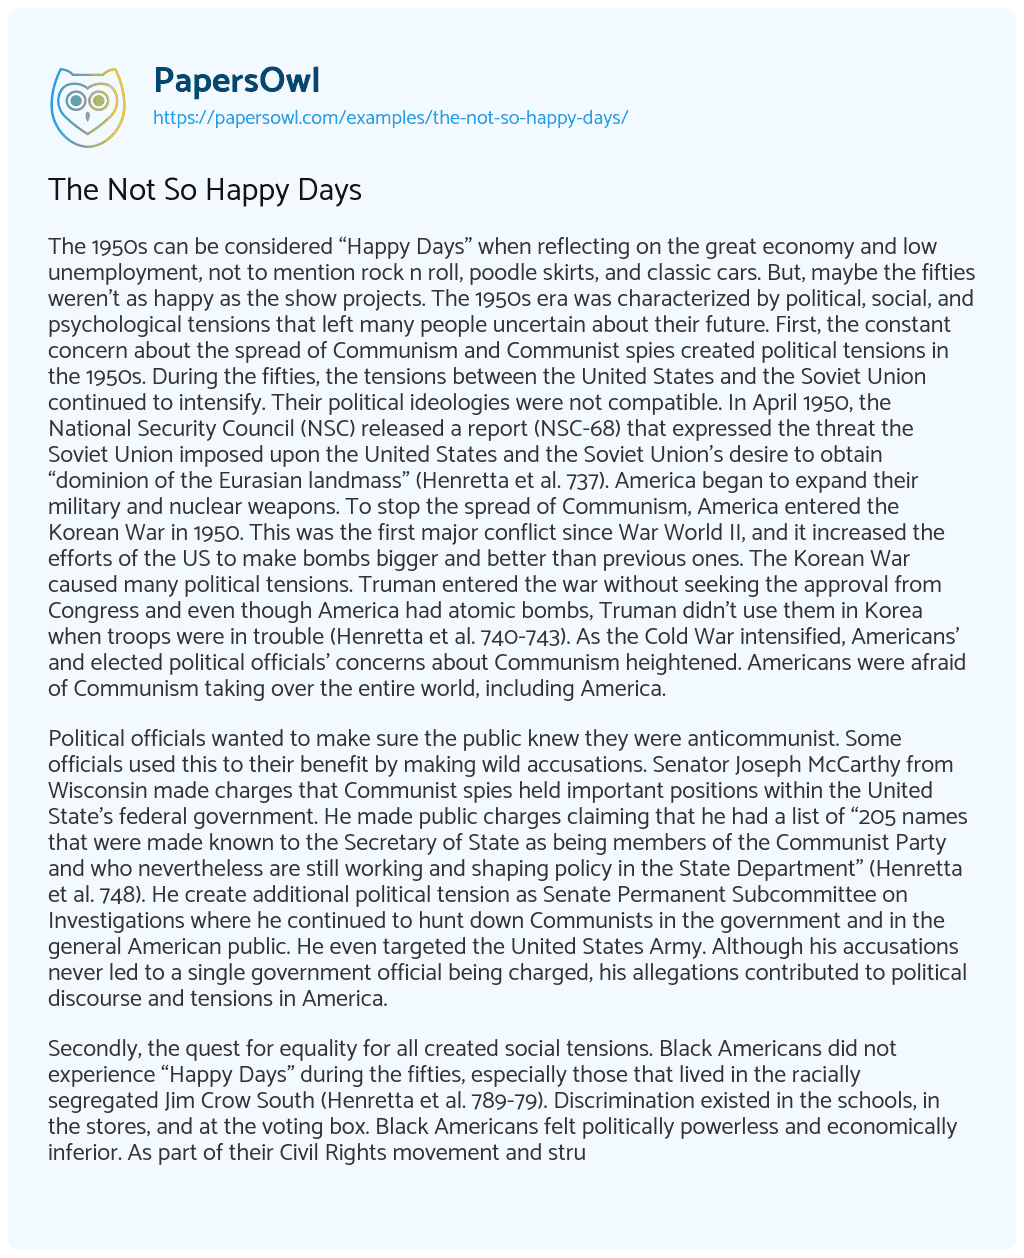 Essay on The not so Happy Days